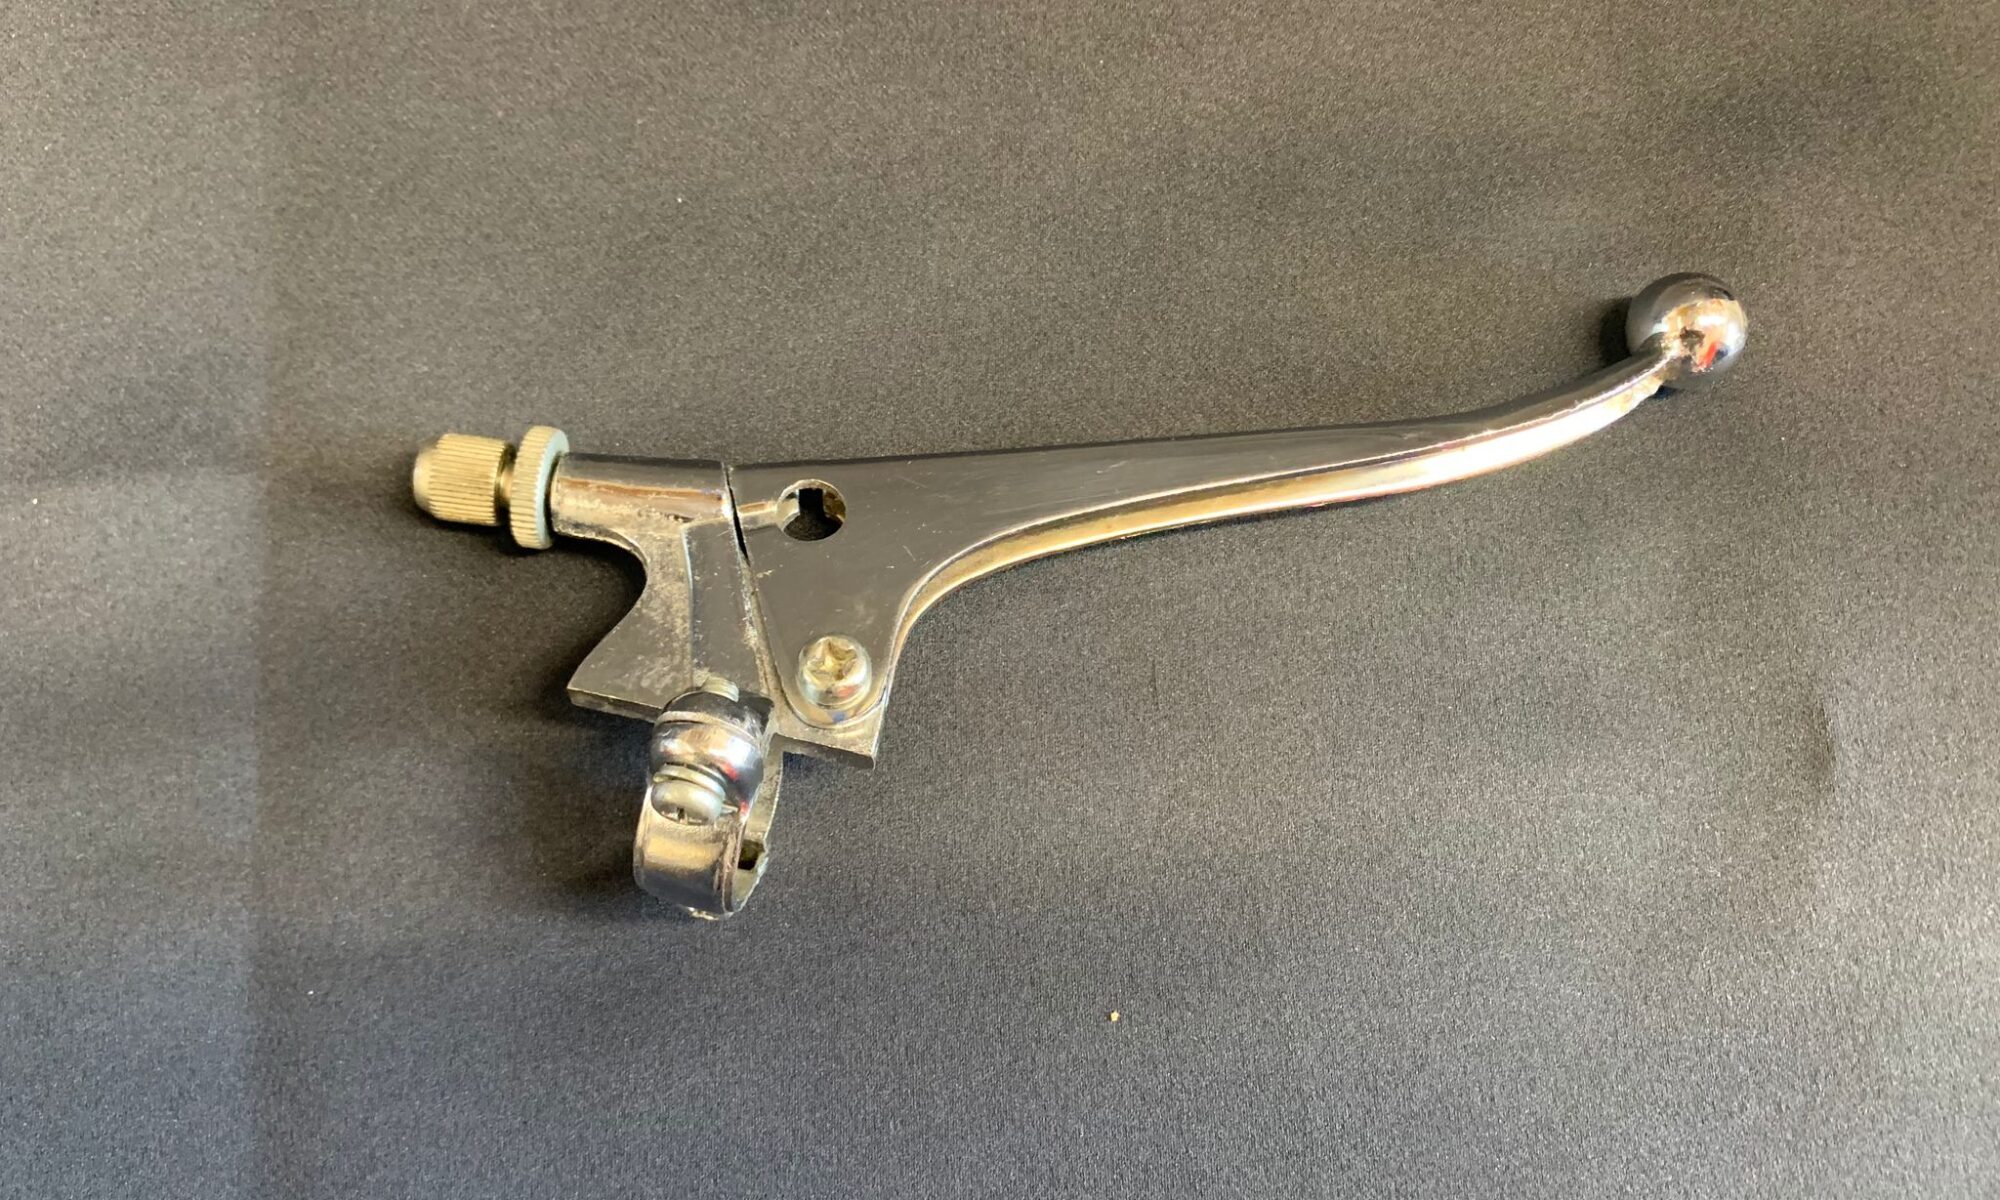 TRIUMPH BSA CLASSIC BRITISH BIKE STYLE BALL END FRONT BRAKE LEVER (NEW OLD STOCK)